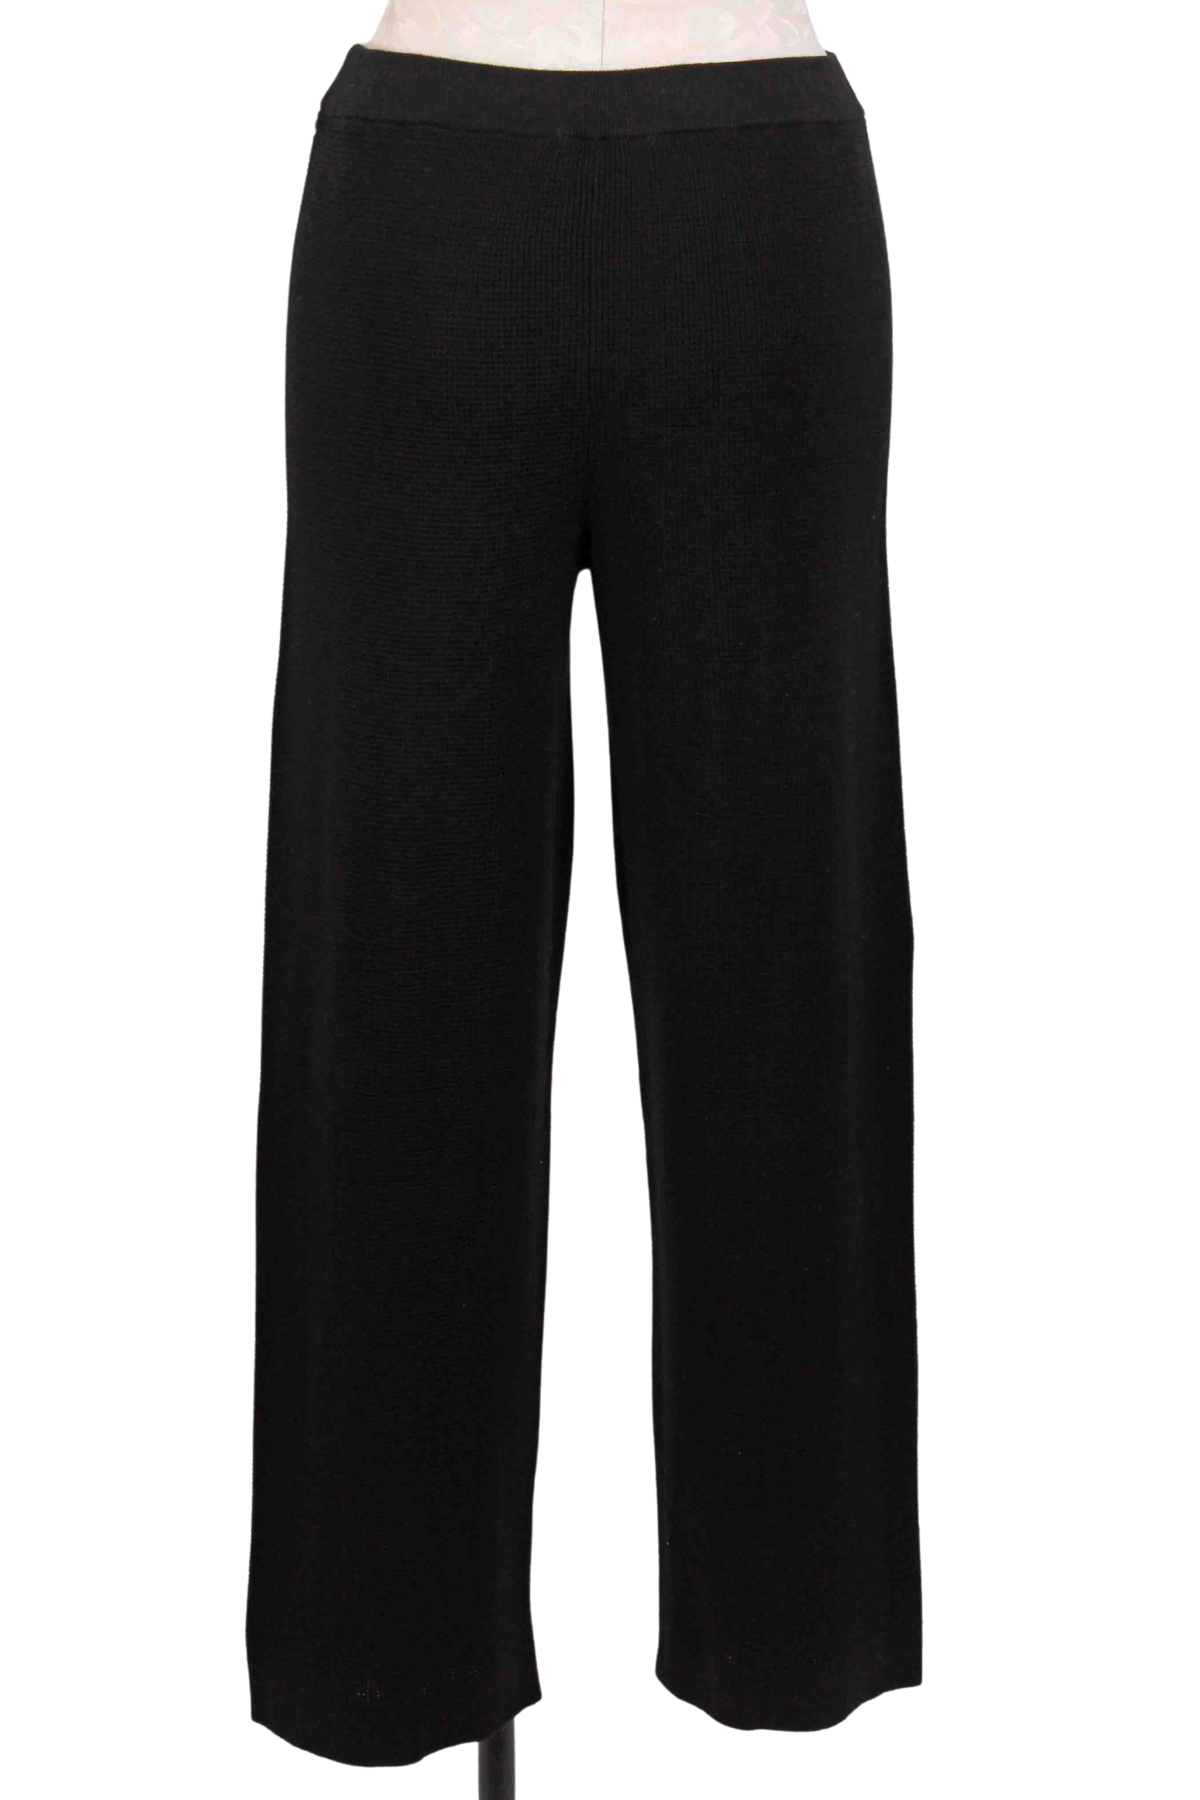 back view of black Micro Thermal Knit Ankle Pant by Liv by Habitat